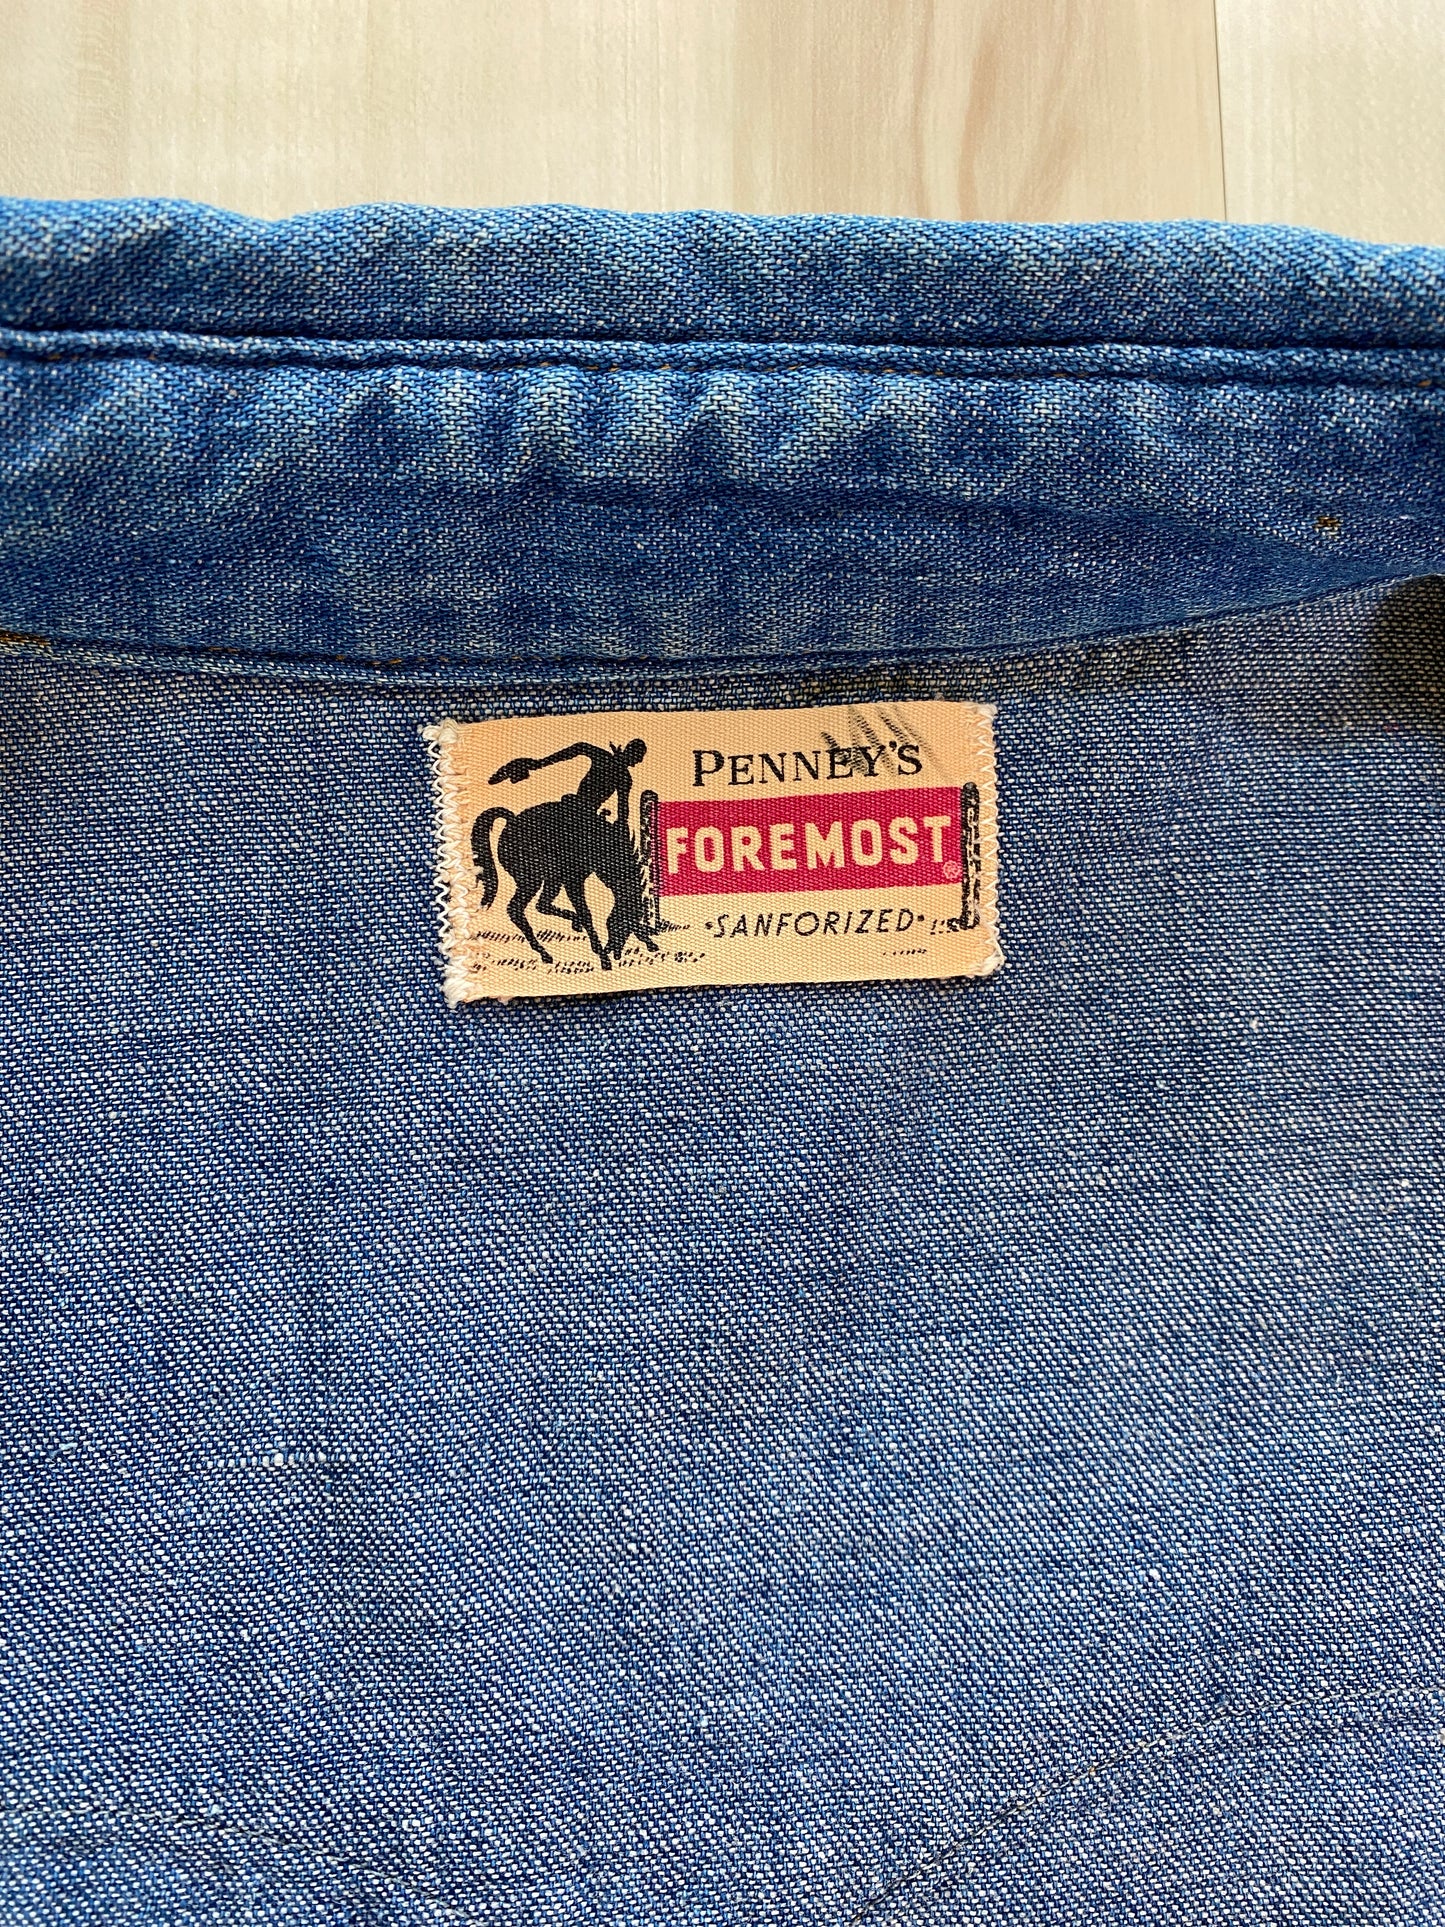 1950s Penney’s Foremost Denim Shirt Women’s Size S